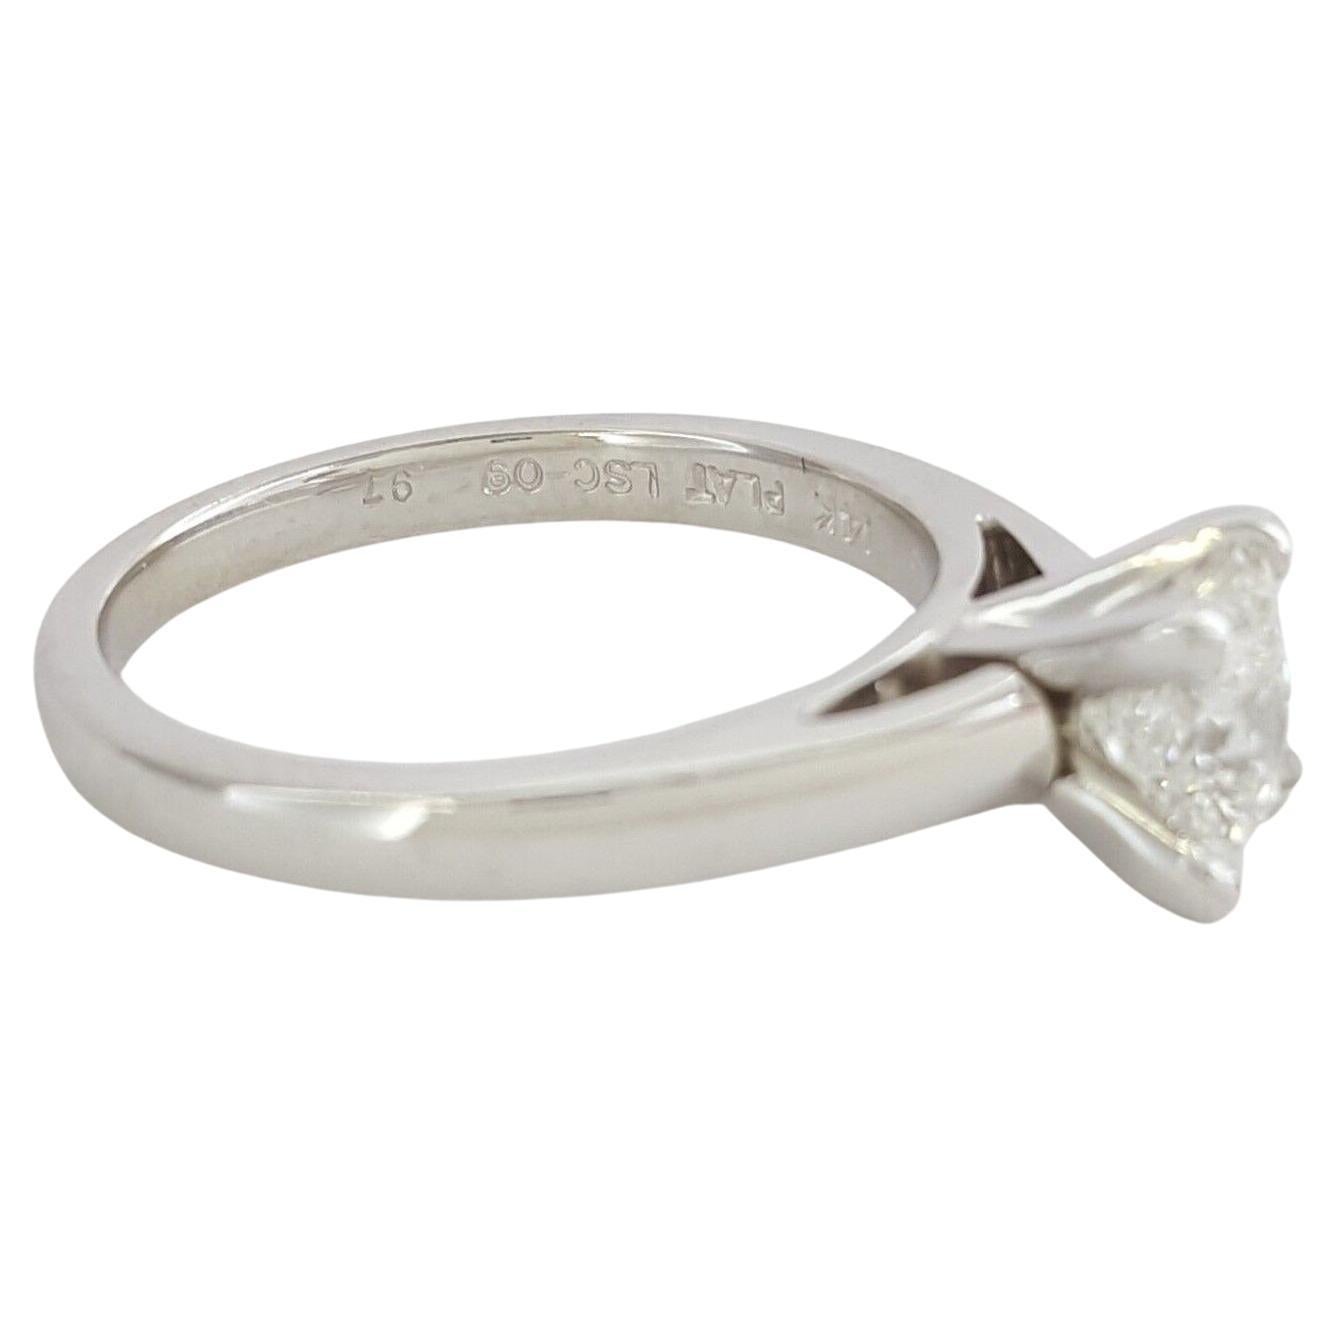 A Leo Princess Brilliant Cut Diamond Solitaire Engagement Ring is crafted with a 14K White Gold shank and a 950 Platinum head. Weighing 4.5 grams and sized 7, the ring features a central Natural Leo Princess Brilliant Cut diamond, with